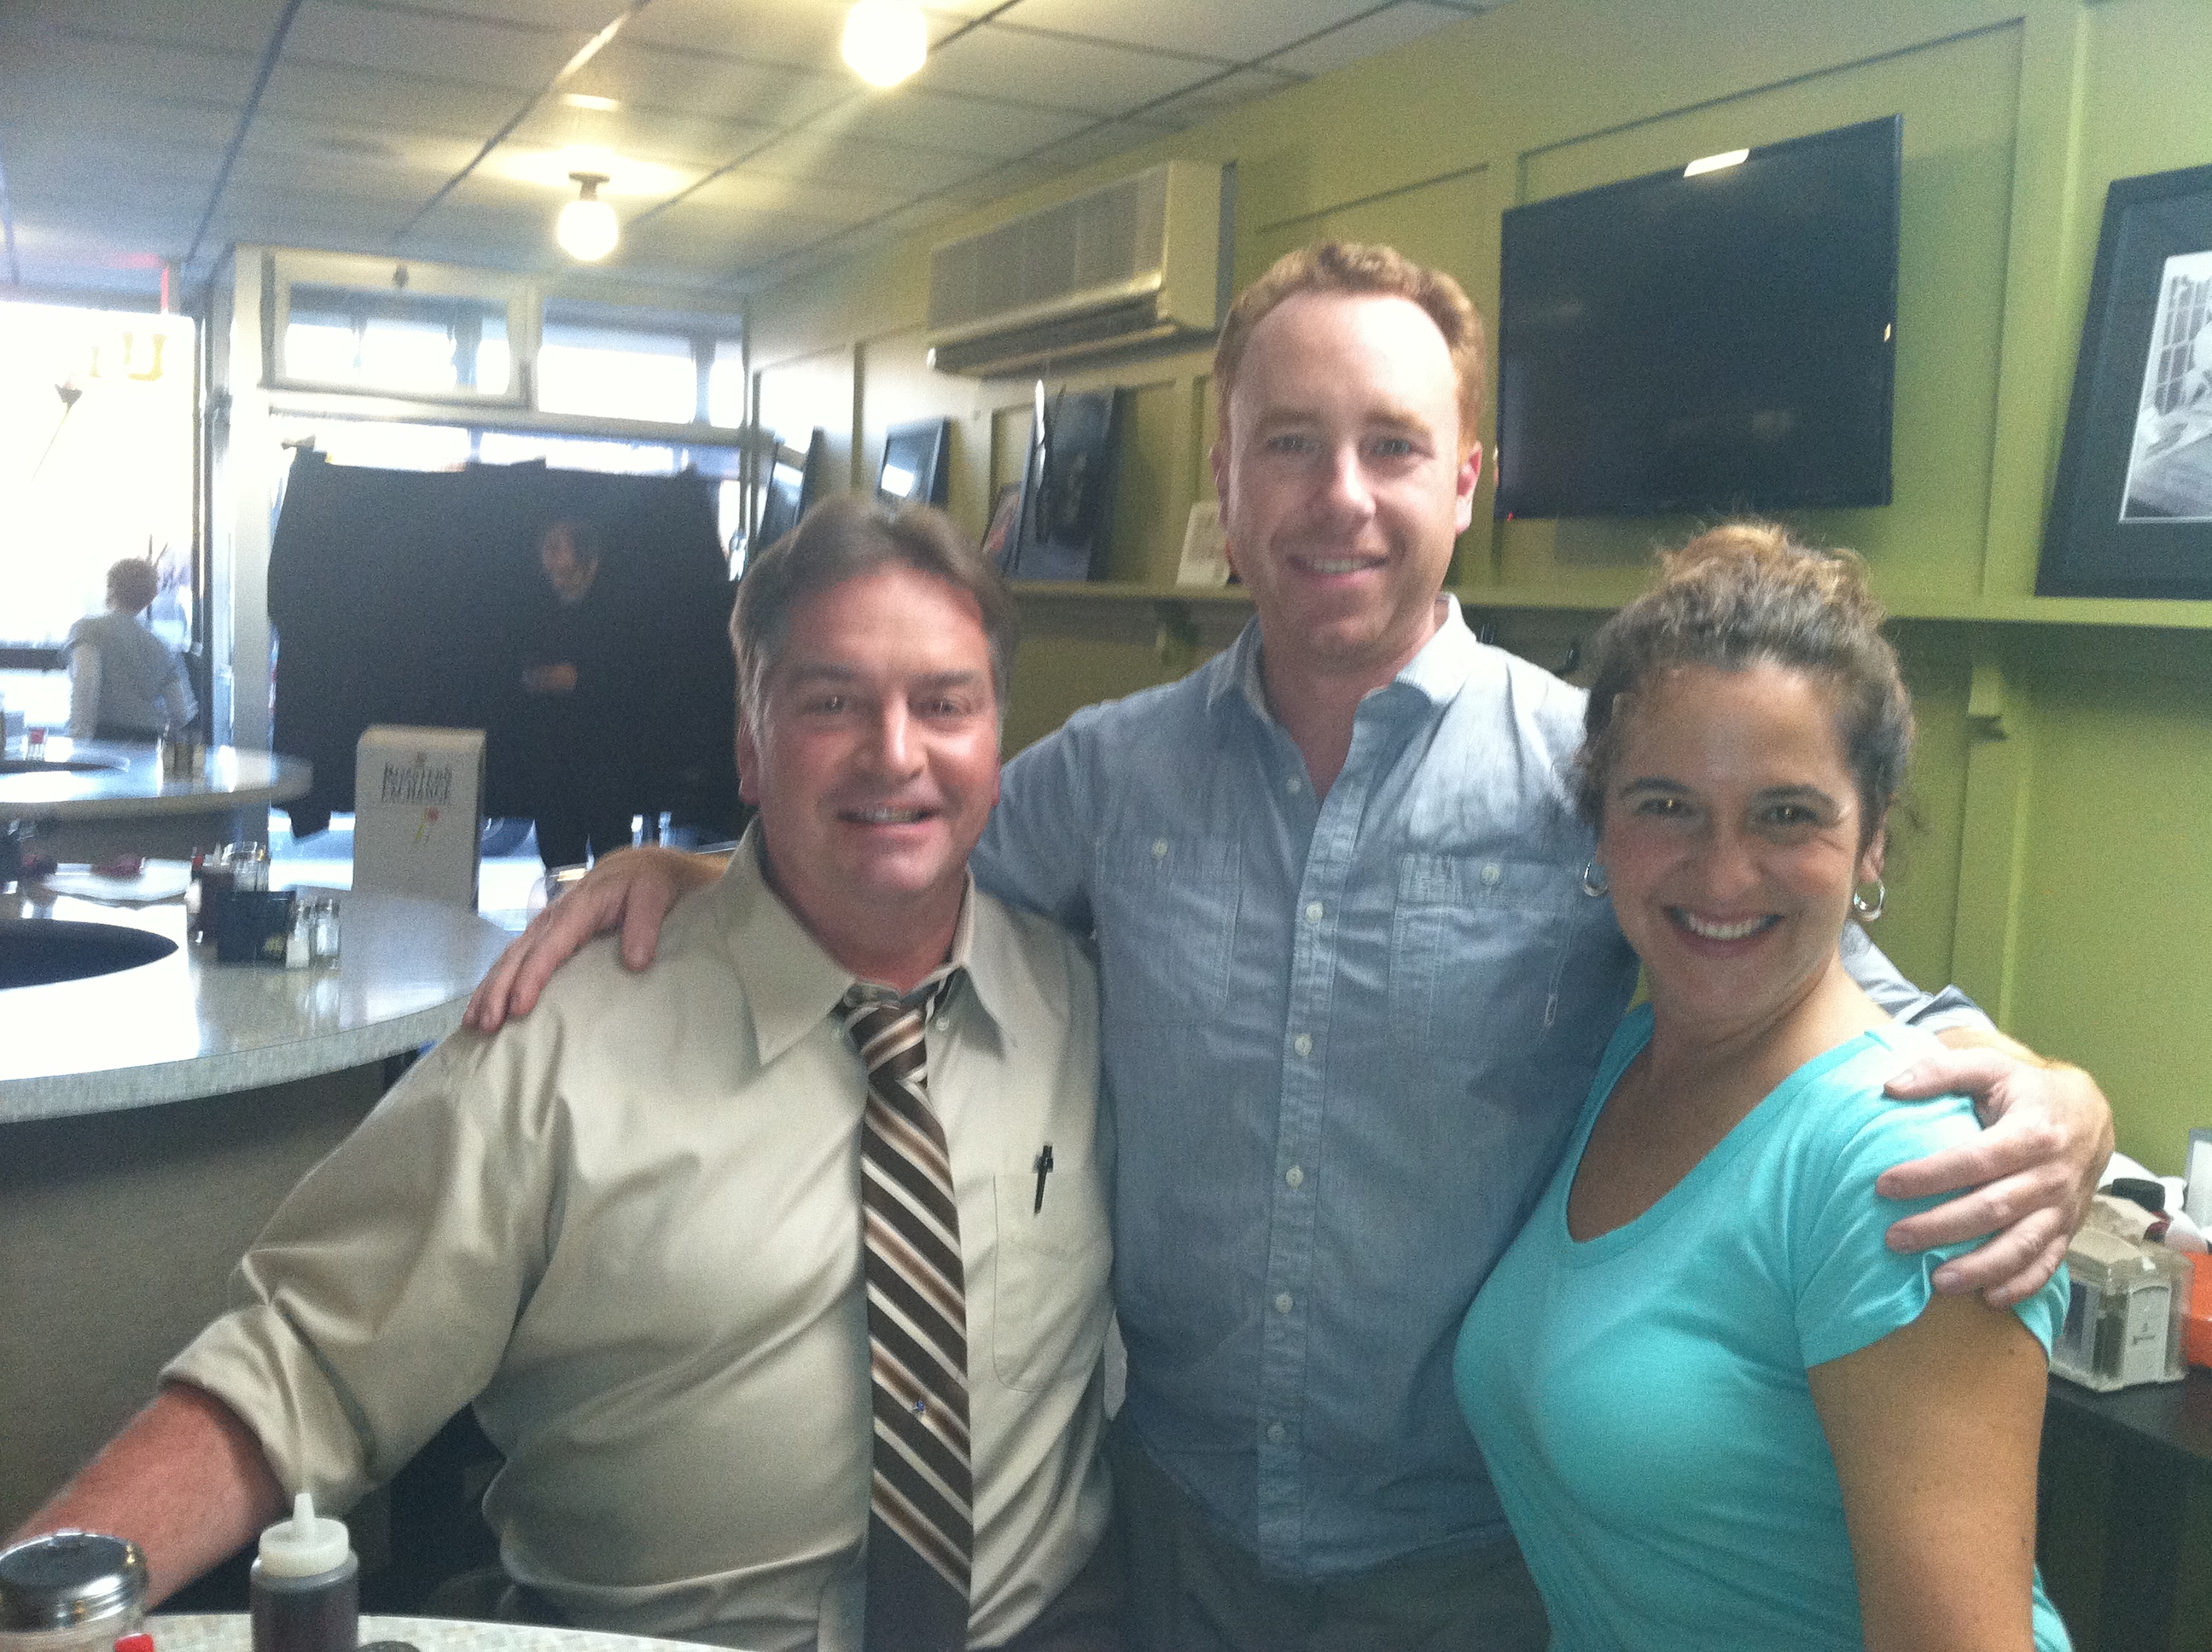 With Michael Callahan and Ben Kahn, director, on set for Megabucks commercial